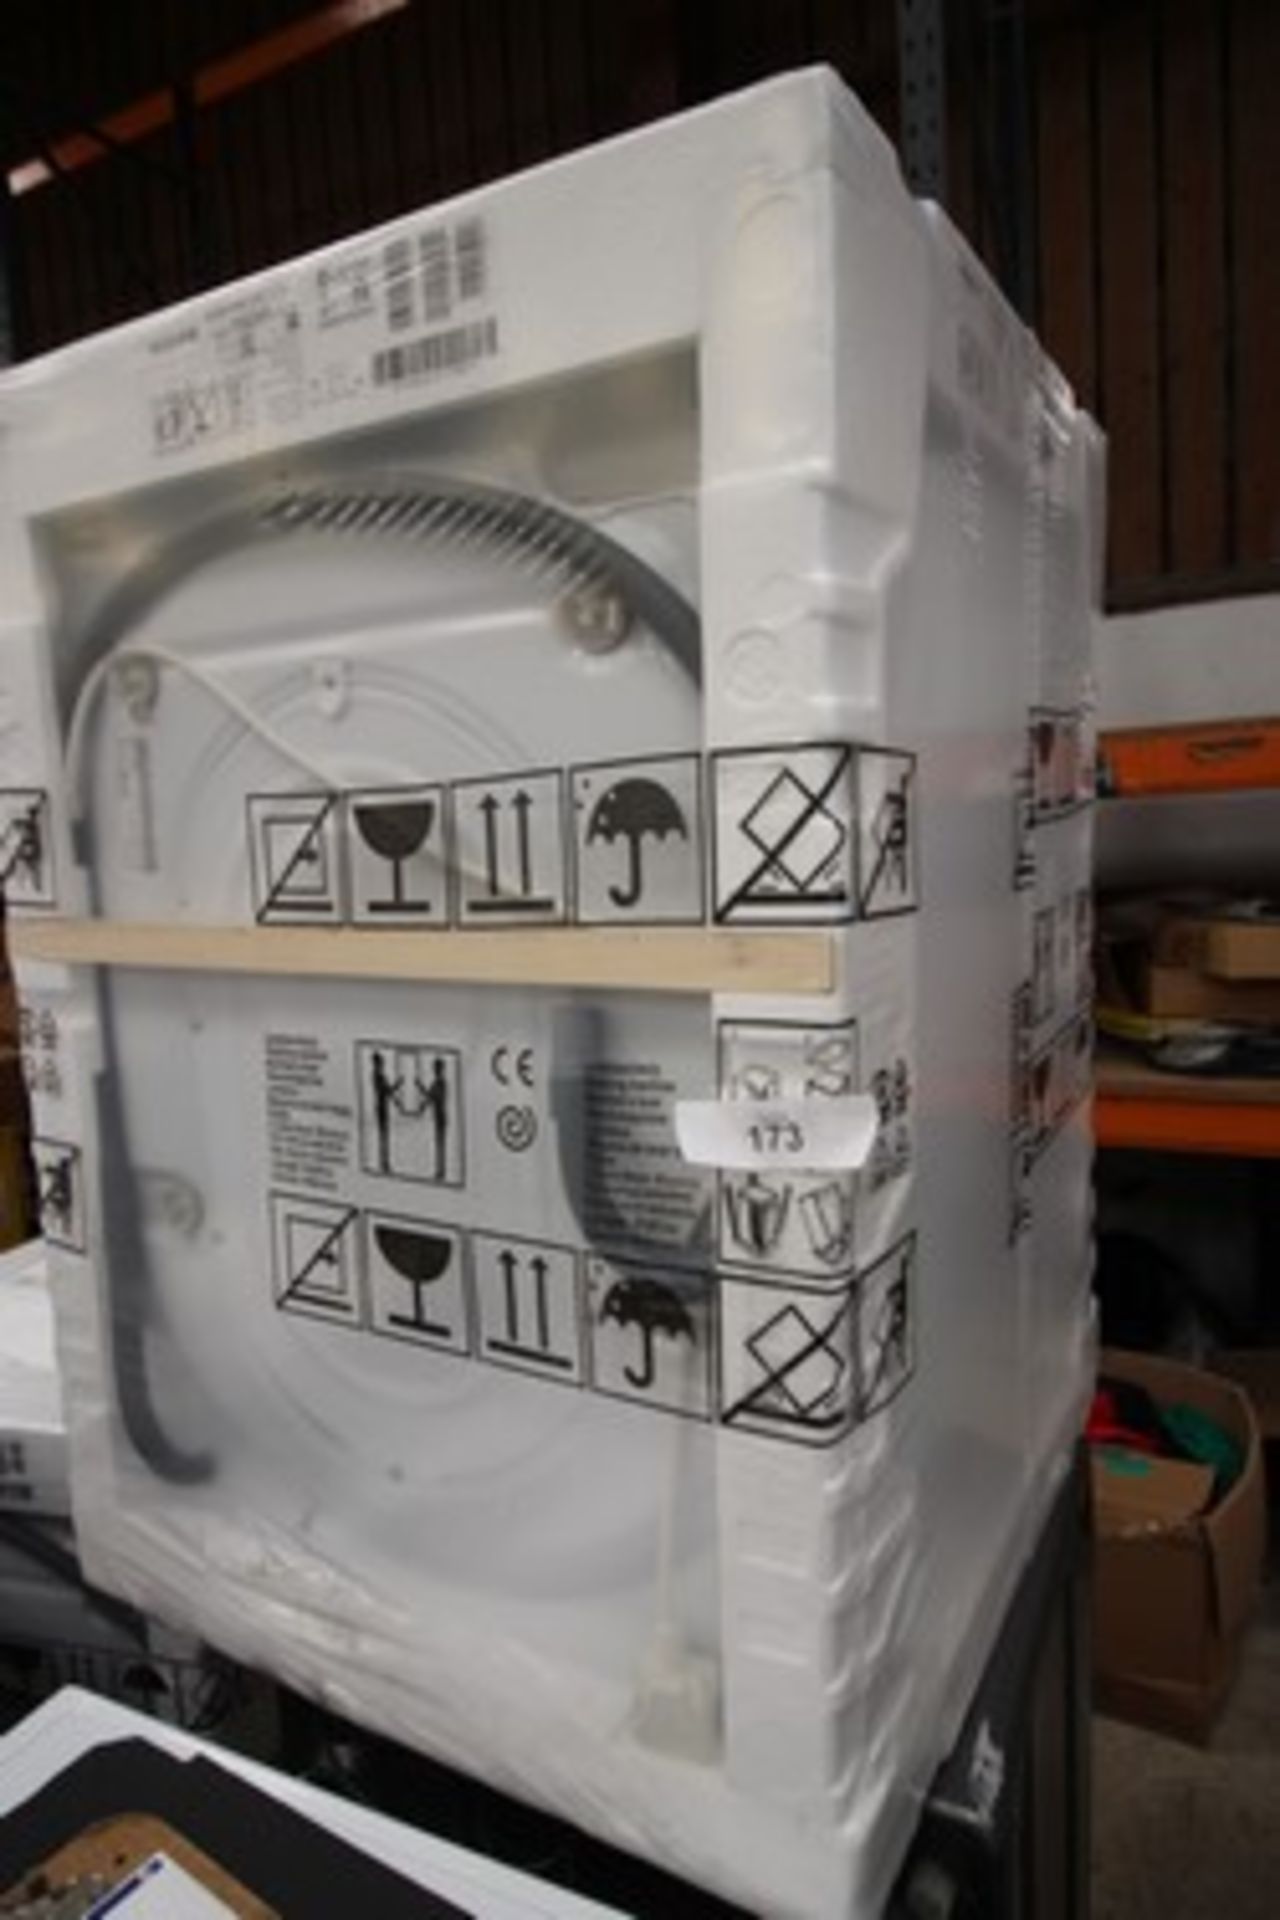 1 x Hotpoint 8kg washing machine, Model NSWE845CWSUKN, 4cm scratch/dent on right side panel - New in - Image 2 of 4